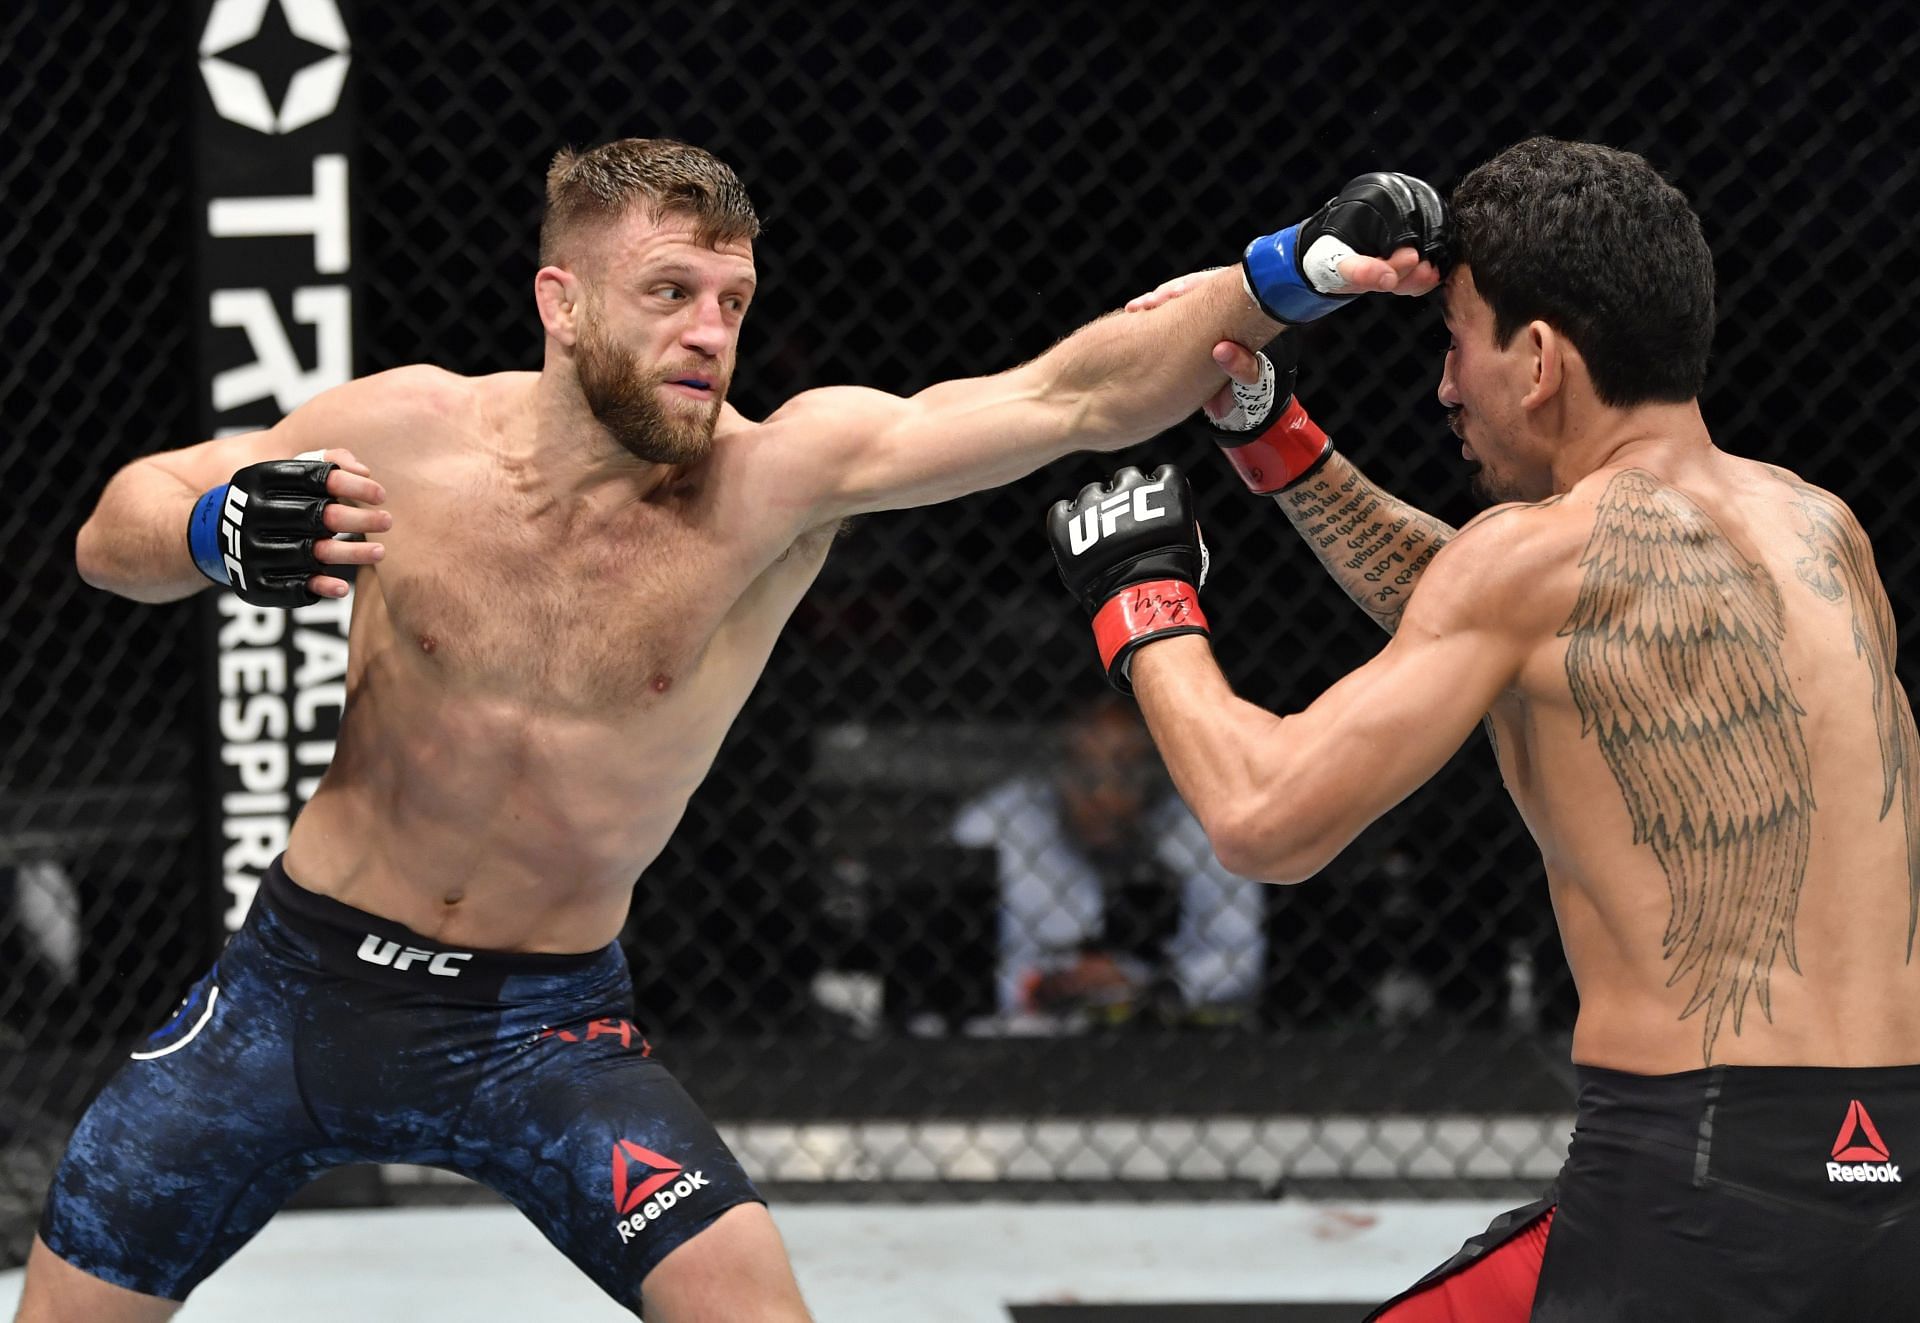 Calvin Kattar is one of the most dangerous strikers in the world at featherweight